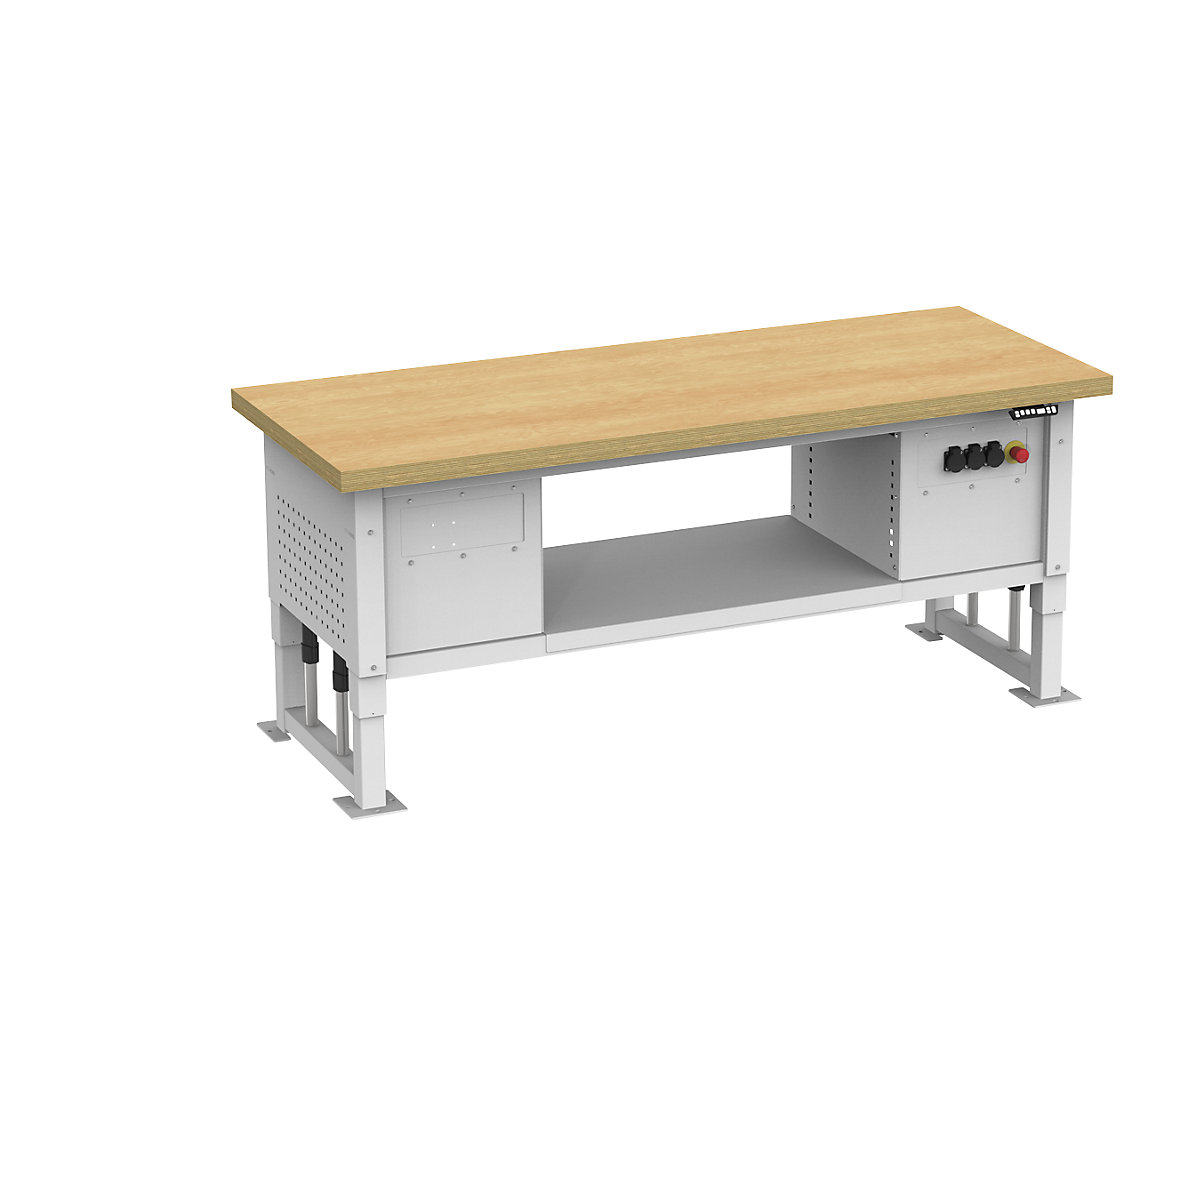 Heavy duty table, electrically height adjustable